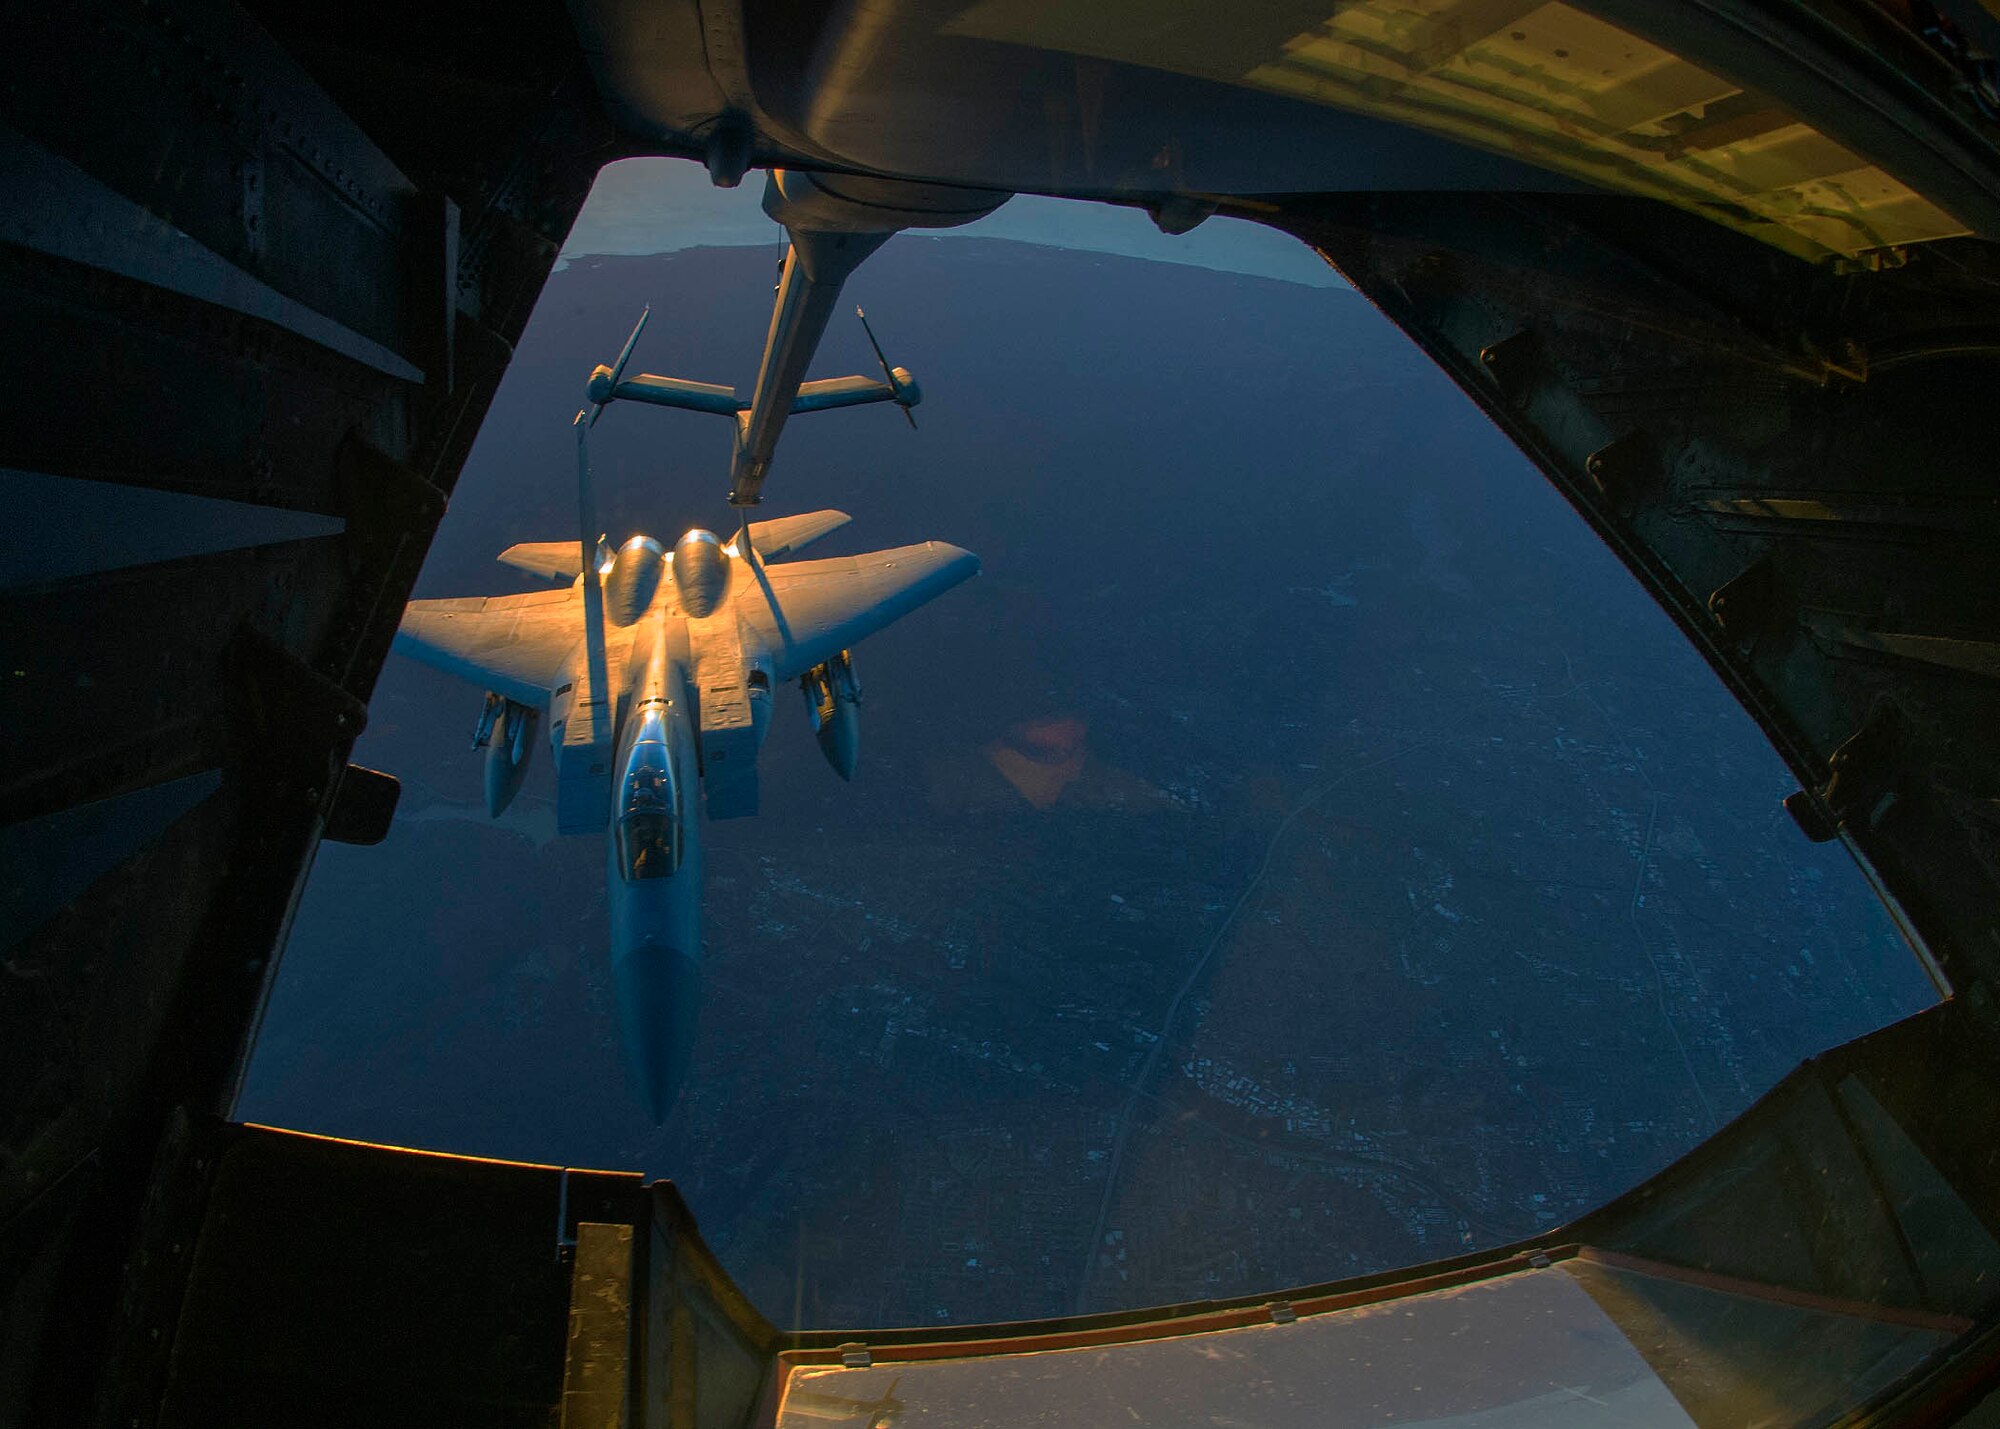 An F-15 Eagle assigned to the California Air National Guard is refueled by a KC-10 Extender assigned to Travis Air Force Base, California, Feb. 7, 2016 during a mission supporting Operation Noble Eagle. The refueling mission was in direct support of fighter aircraft patrolling the airspace surrounding Super Bowl 50 in Santa Clara, California. Headed by NORAD, Operation Noble Eagle is the name given to the military response to the type of terrorist attacks used on Sept. 11, 2001. Those attacks prompted NORAD to augment its mission to begin conducting surveillance and control of the aerospace inside Canada and the United States (U.S. Air Force photo by T.C. Perkins Jr.)